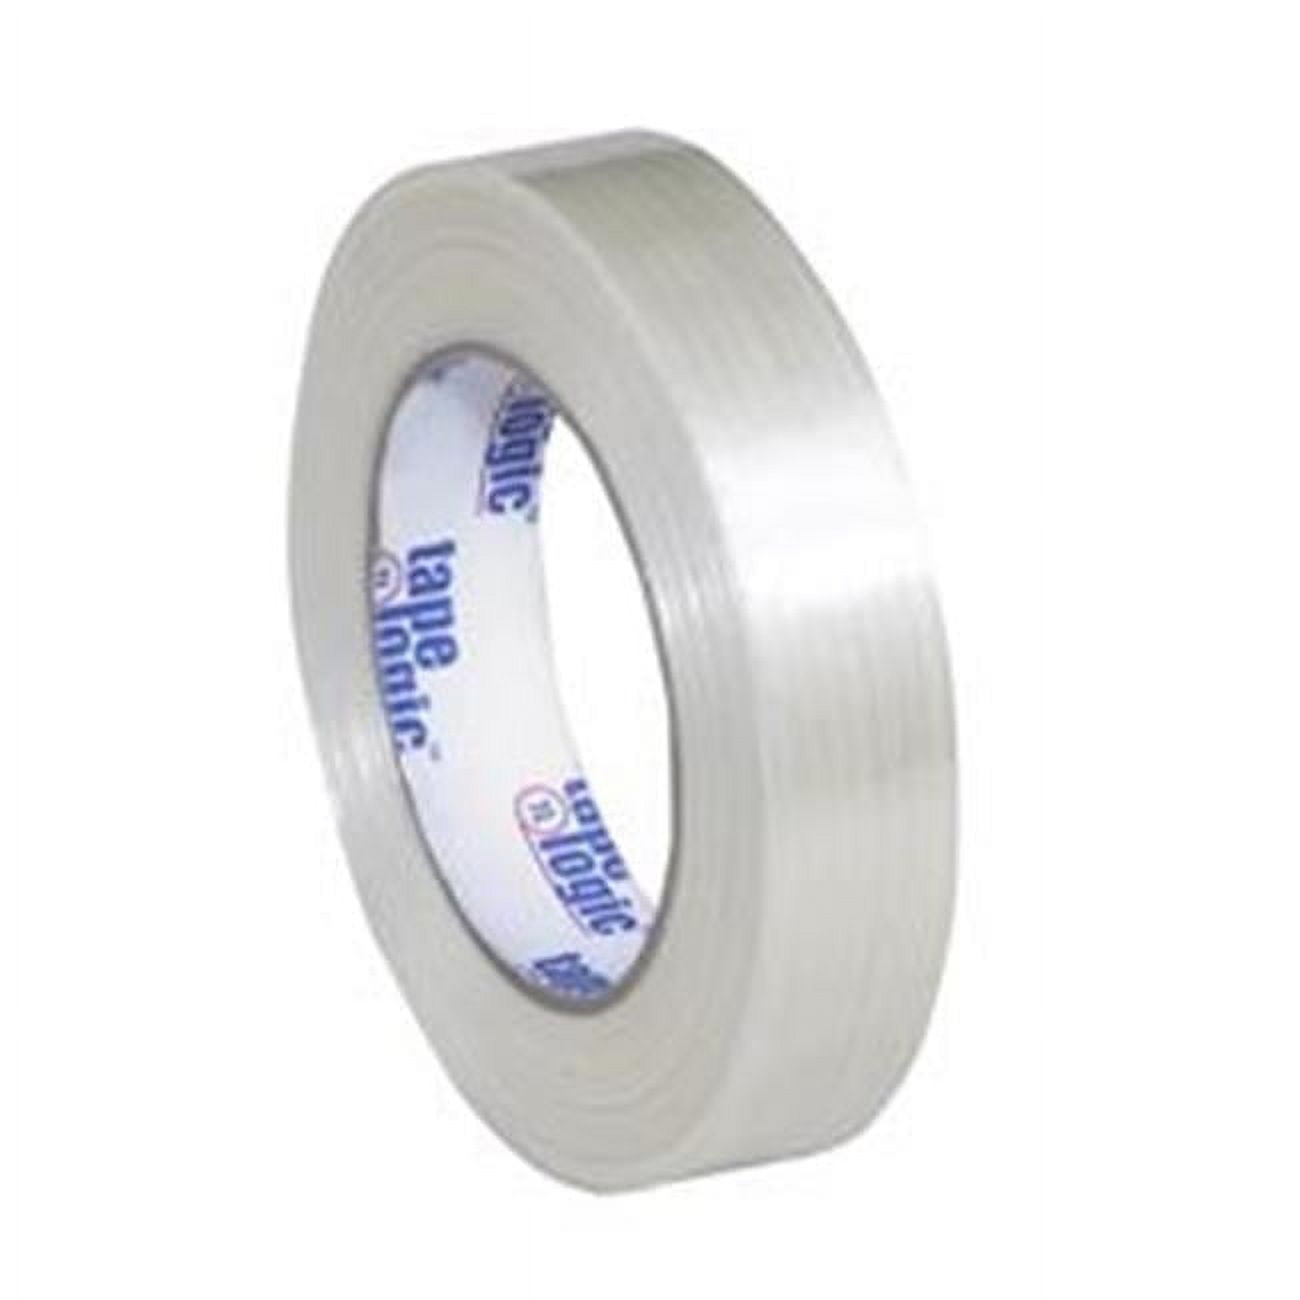 UPC 848109022390 product image for Tape Logic T915150012PK 1 in. x 60 yards 1500 Strapping Tape, Clear - Pack of 12 | upcitemdb.com